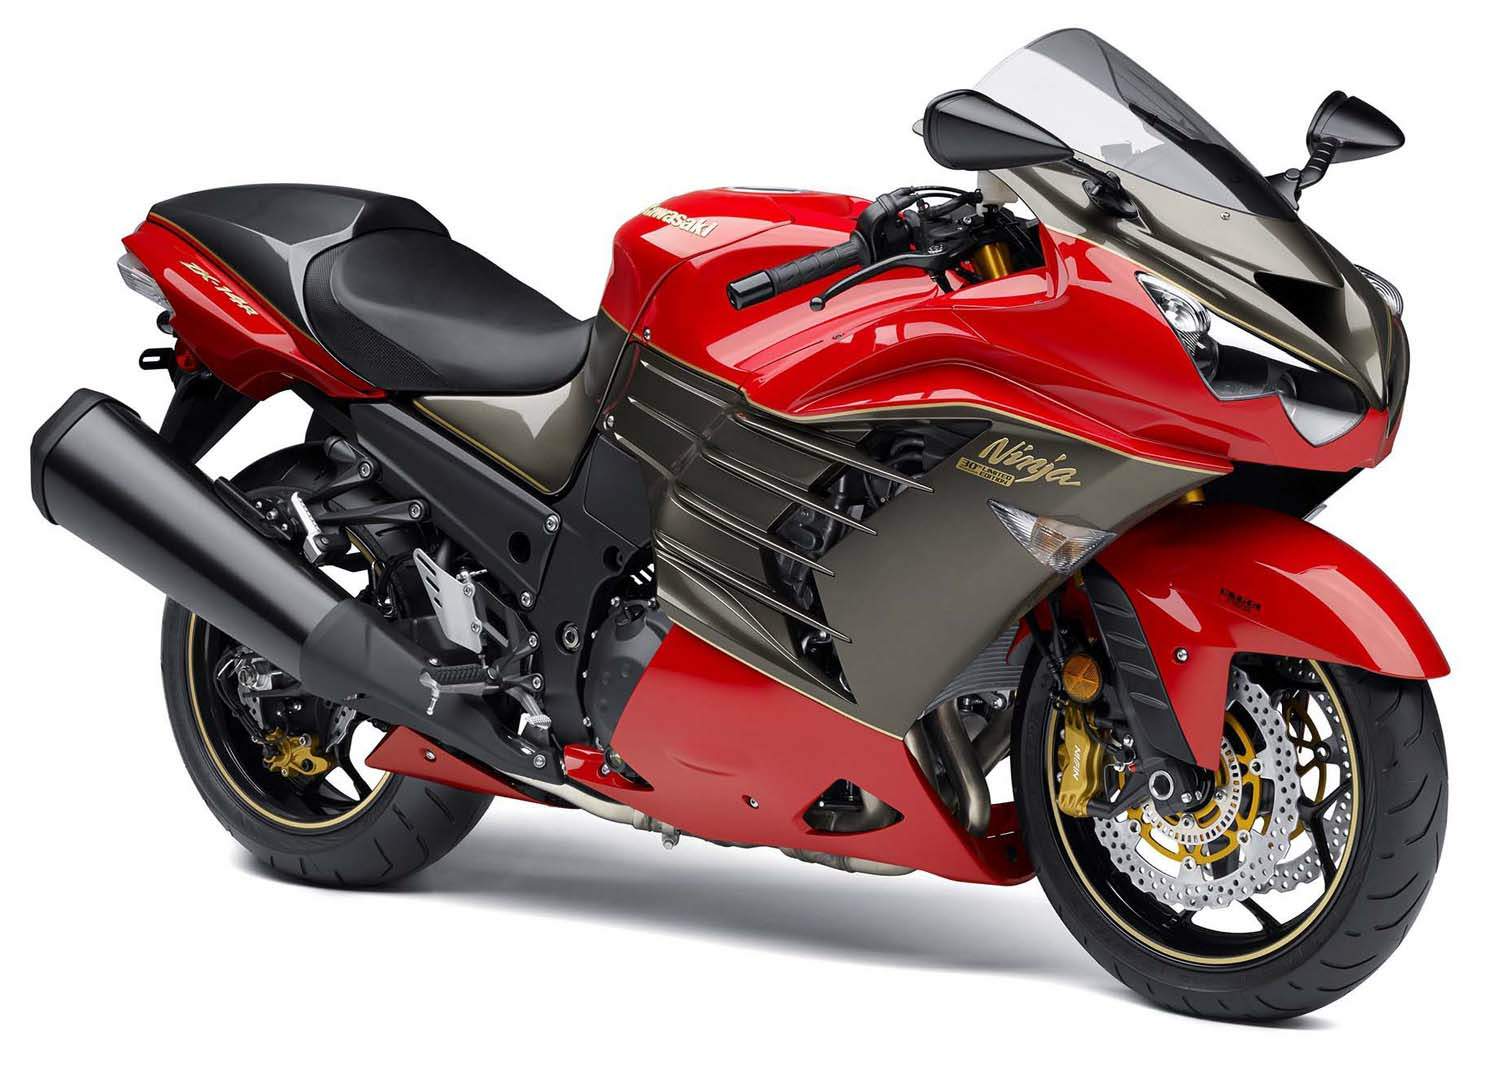 Kawasaki ZX-14 30th Anniversery Limited Edition technical specifications